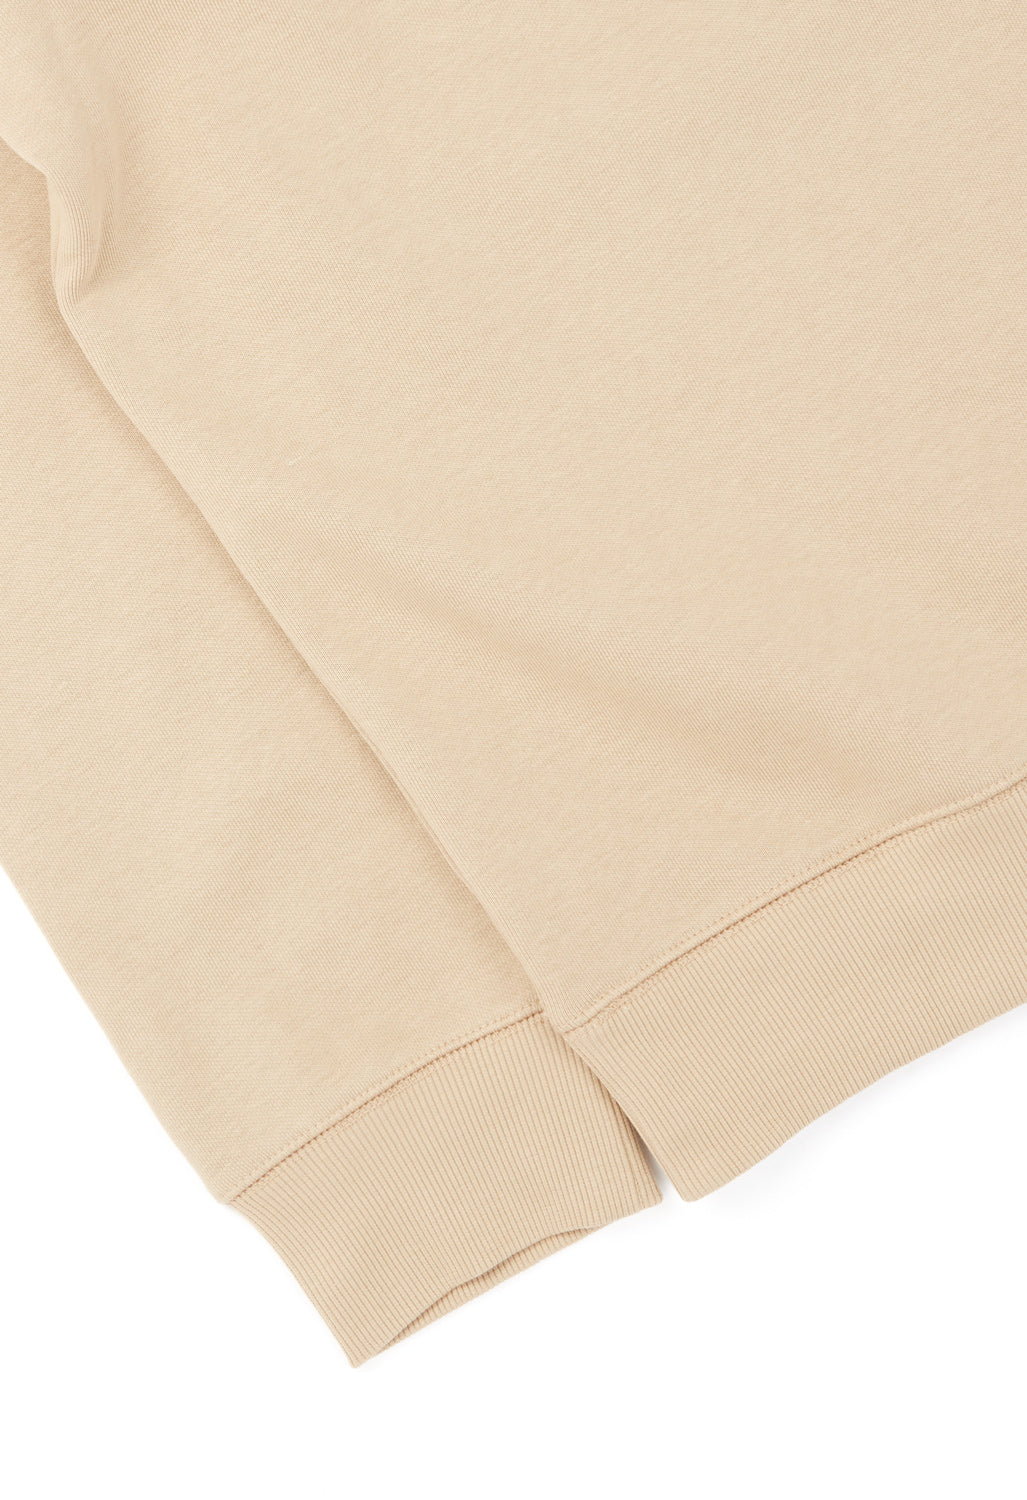 Carhartt WIP Men's Chase Sweat - Sable / Gold